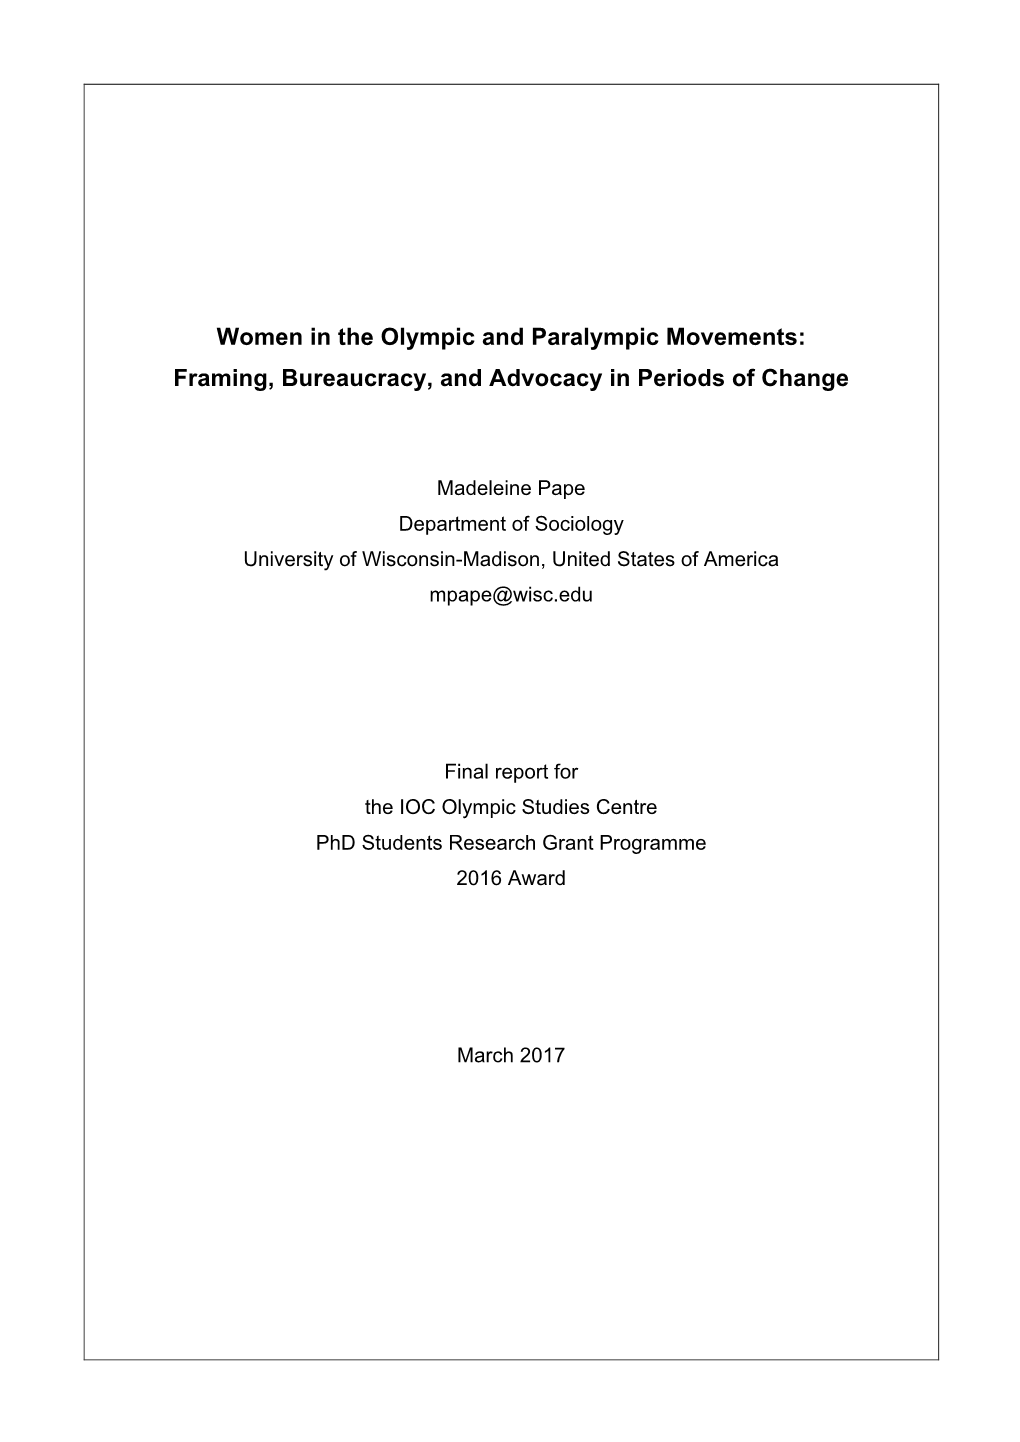 Women in the Olympic and Paralympic Movements: Framing, Bureaucracy, and Advocacy in Periods of Change